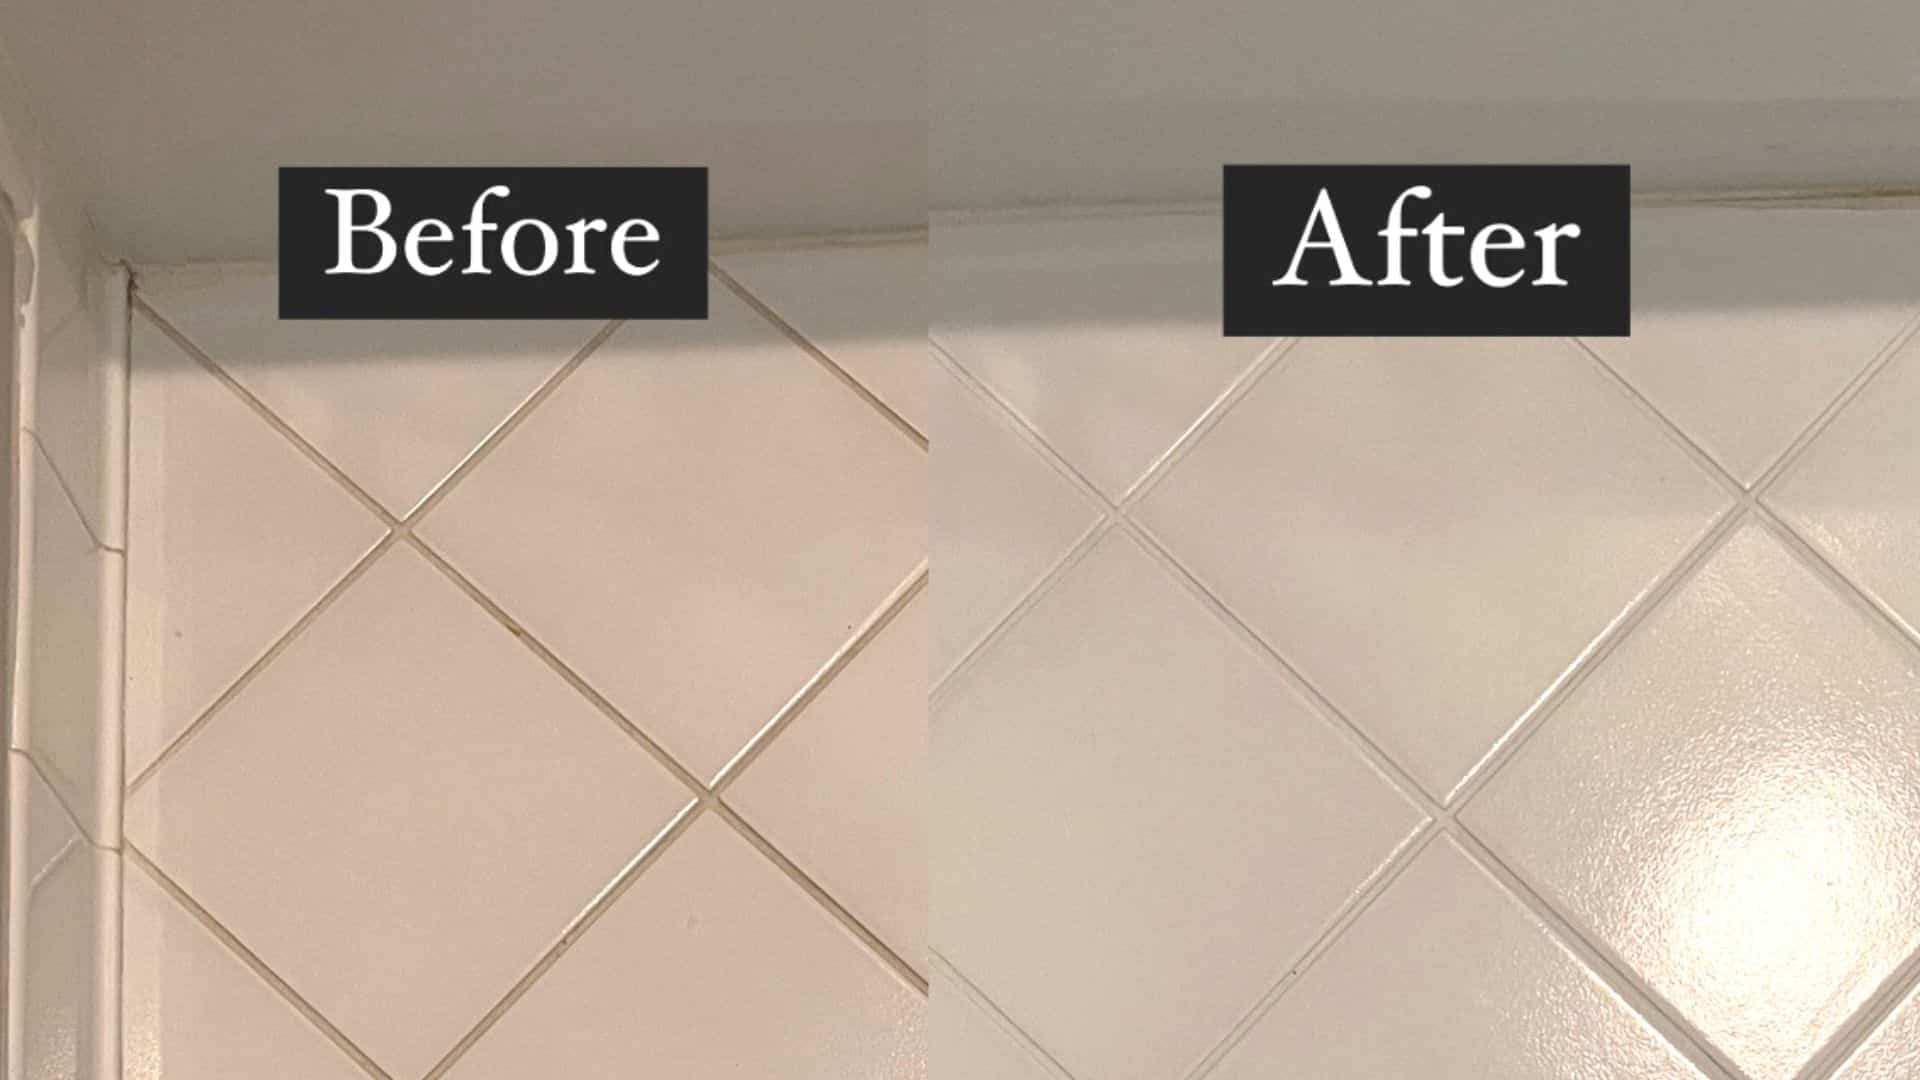 Bathroom remodel - concerned with grout color choice : r/Remodel